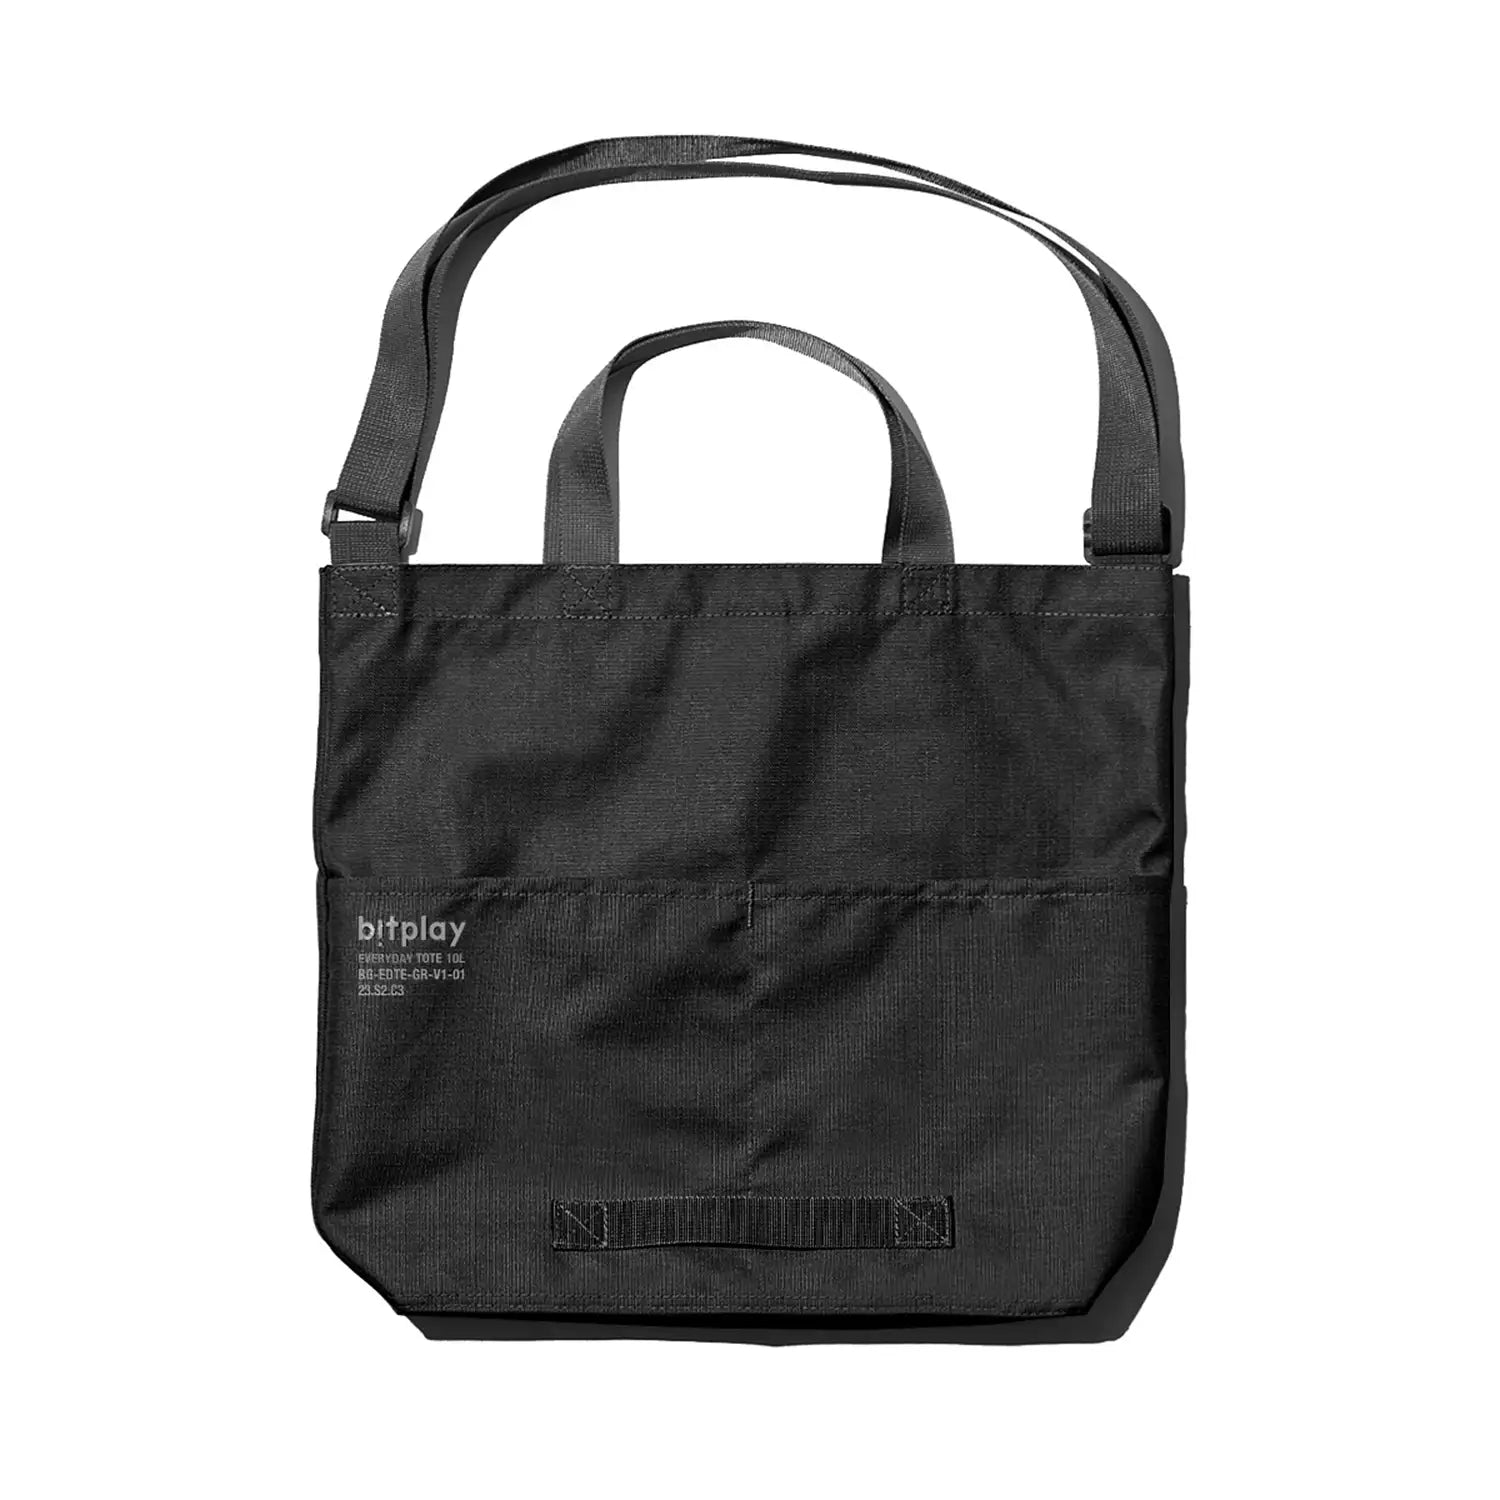 Bitplay Everyday Tote Bag With Multiple Pockets and Zippers